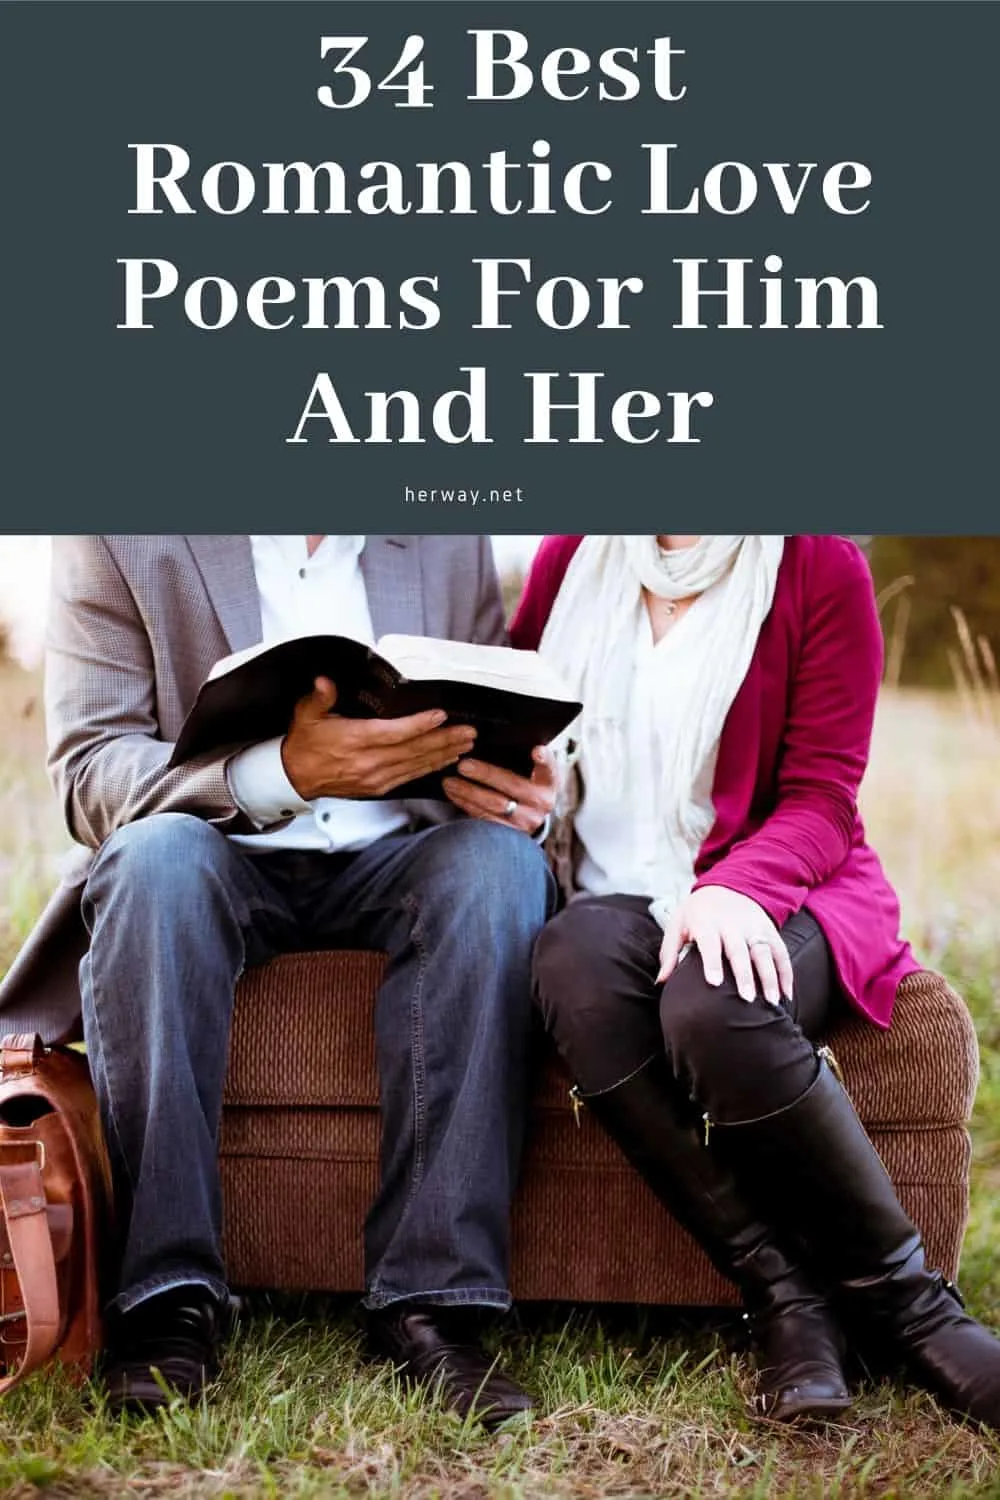 34 Best Romantic Love Poems For Him And Her